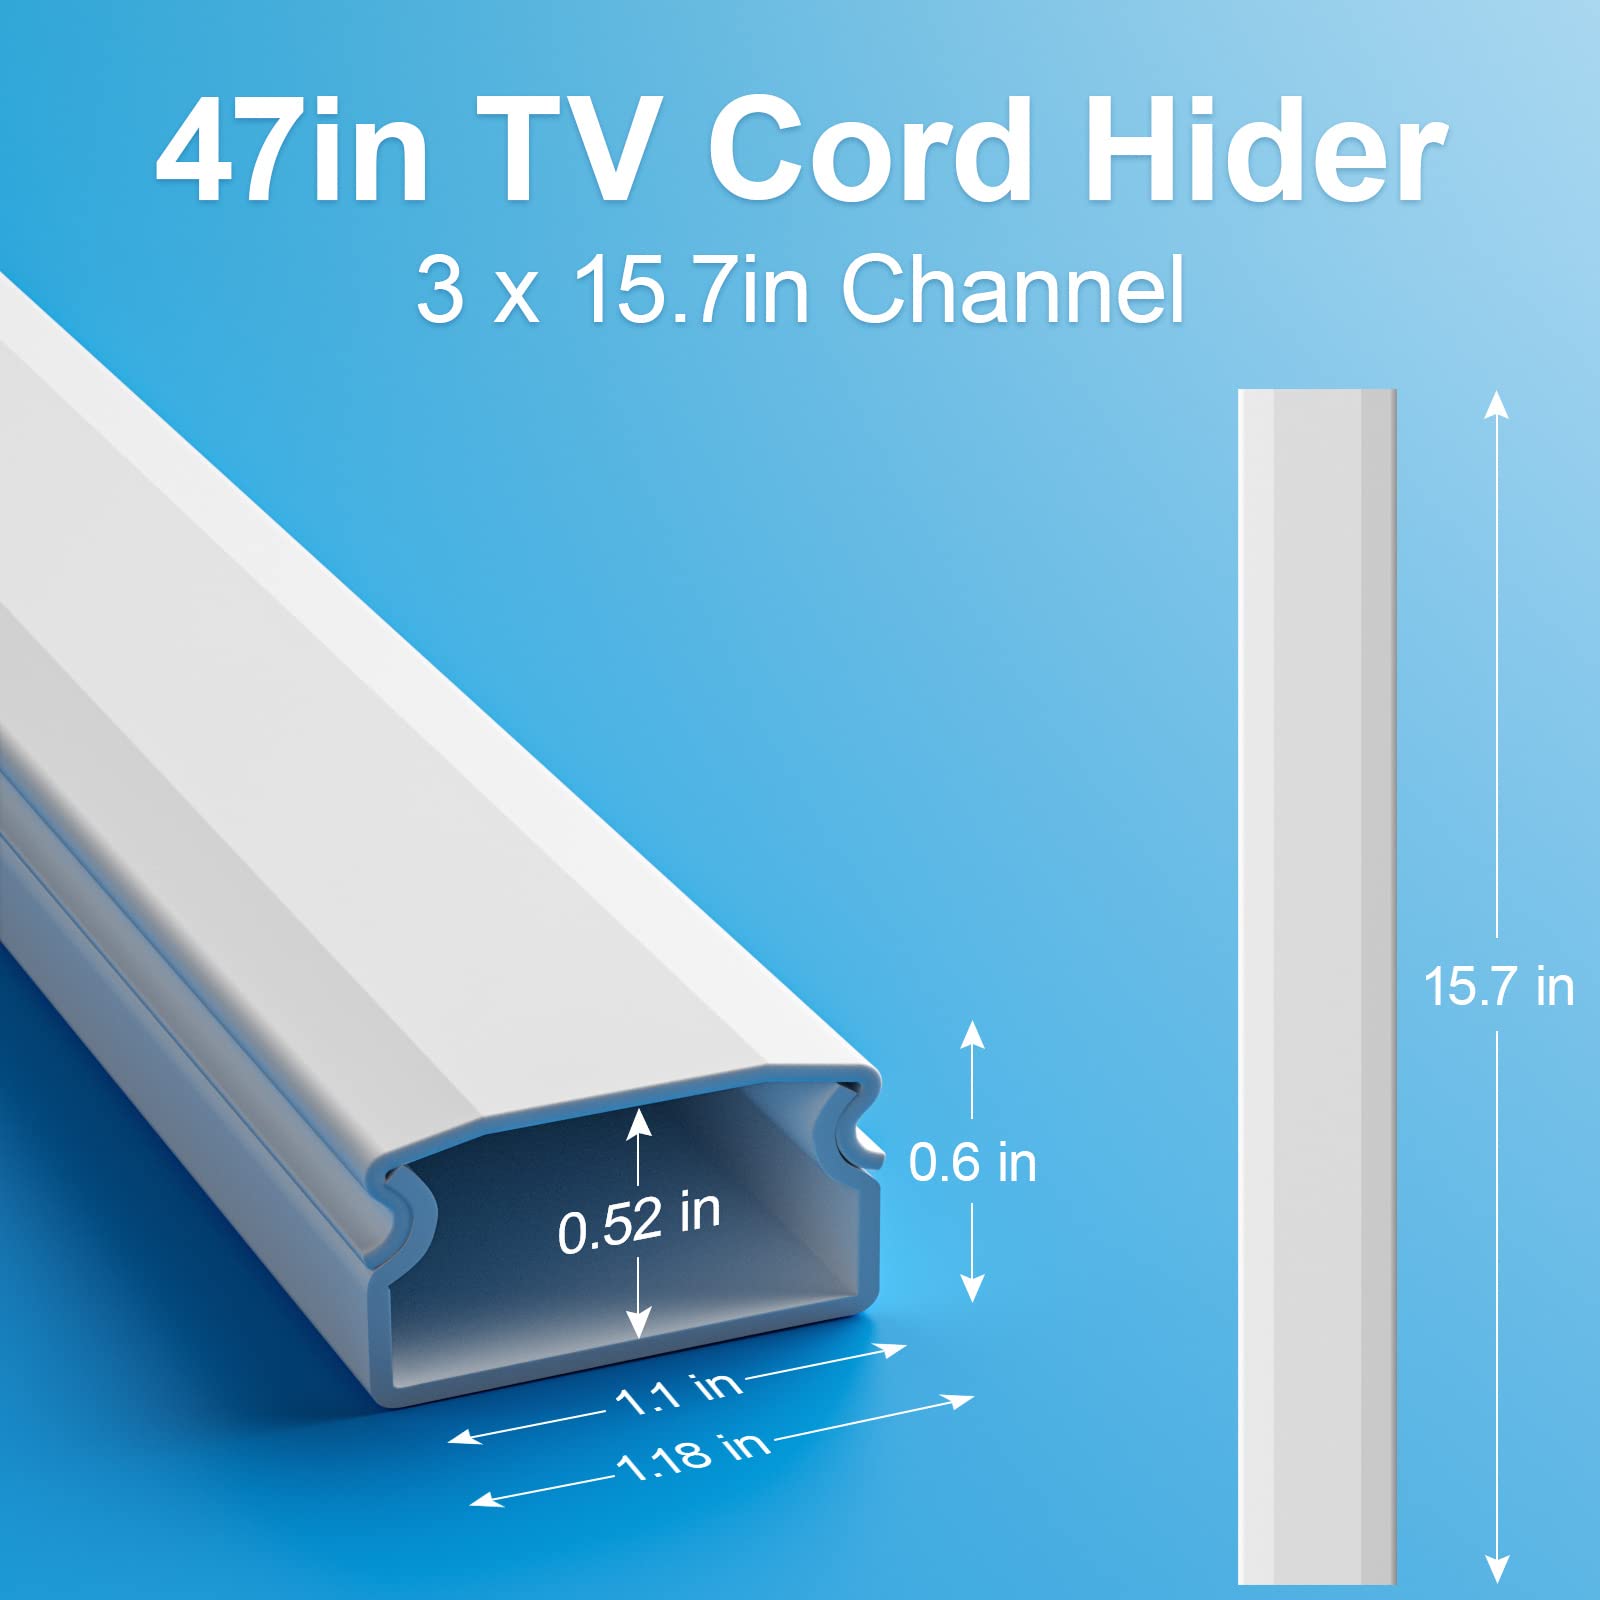 TV Cord Hider, 47In Cord Cover, Large Cable Hider, Wire Covers for 4 Cords, Cable Raceway Wire Hider, Wire Hiders for TV on Wall, Cable Cover Cord Concealer, 3×L15.7in W1.18in H0.6in, White